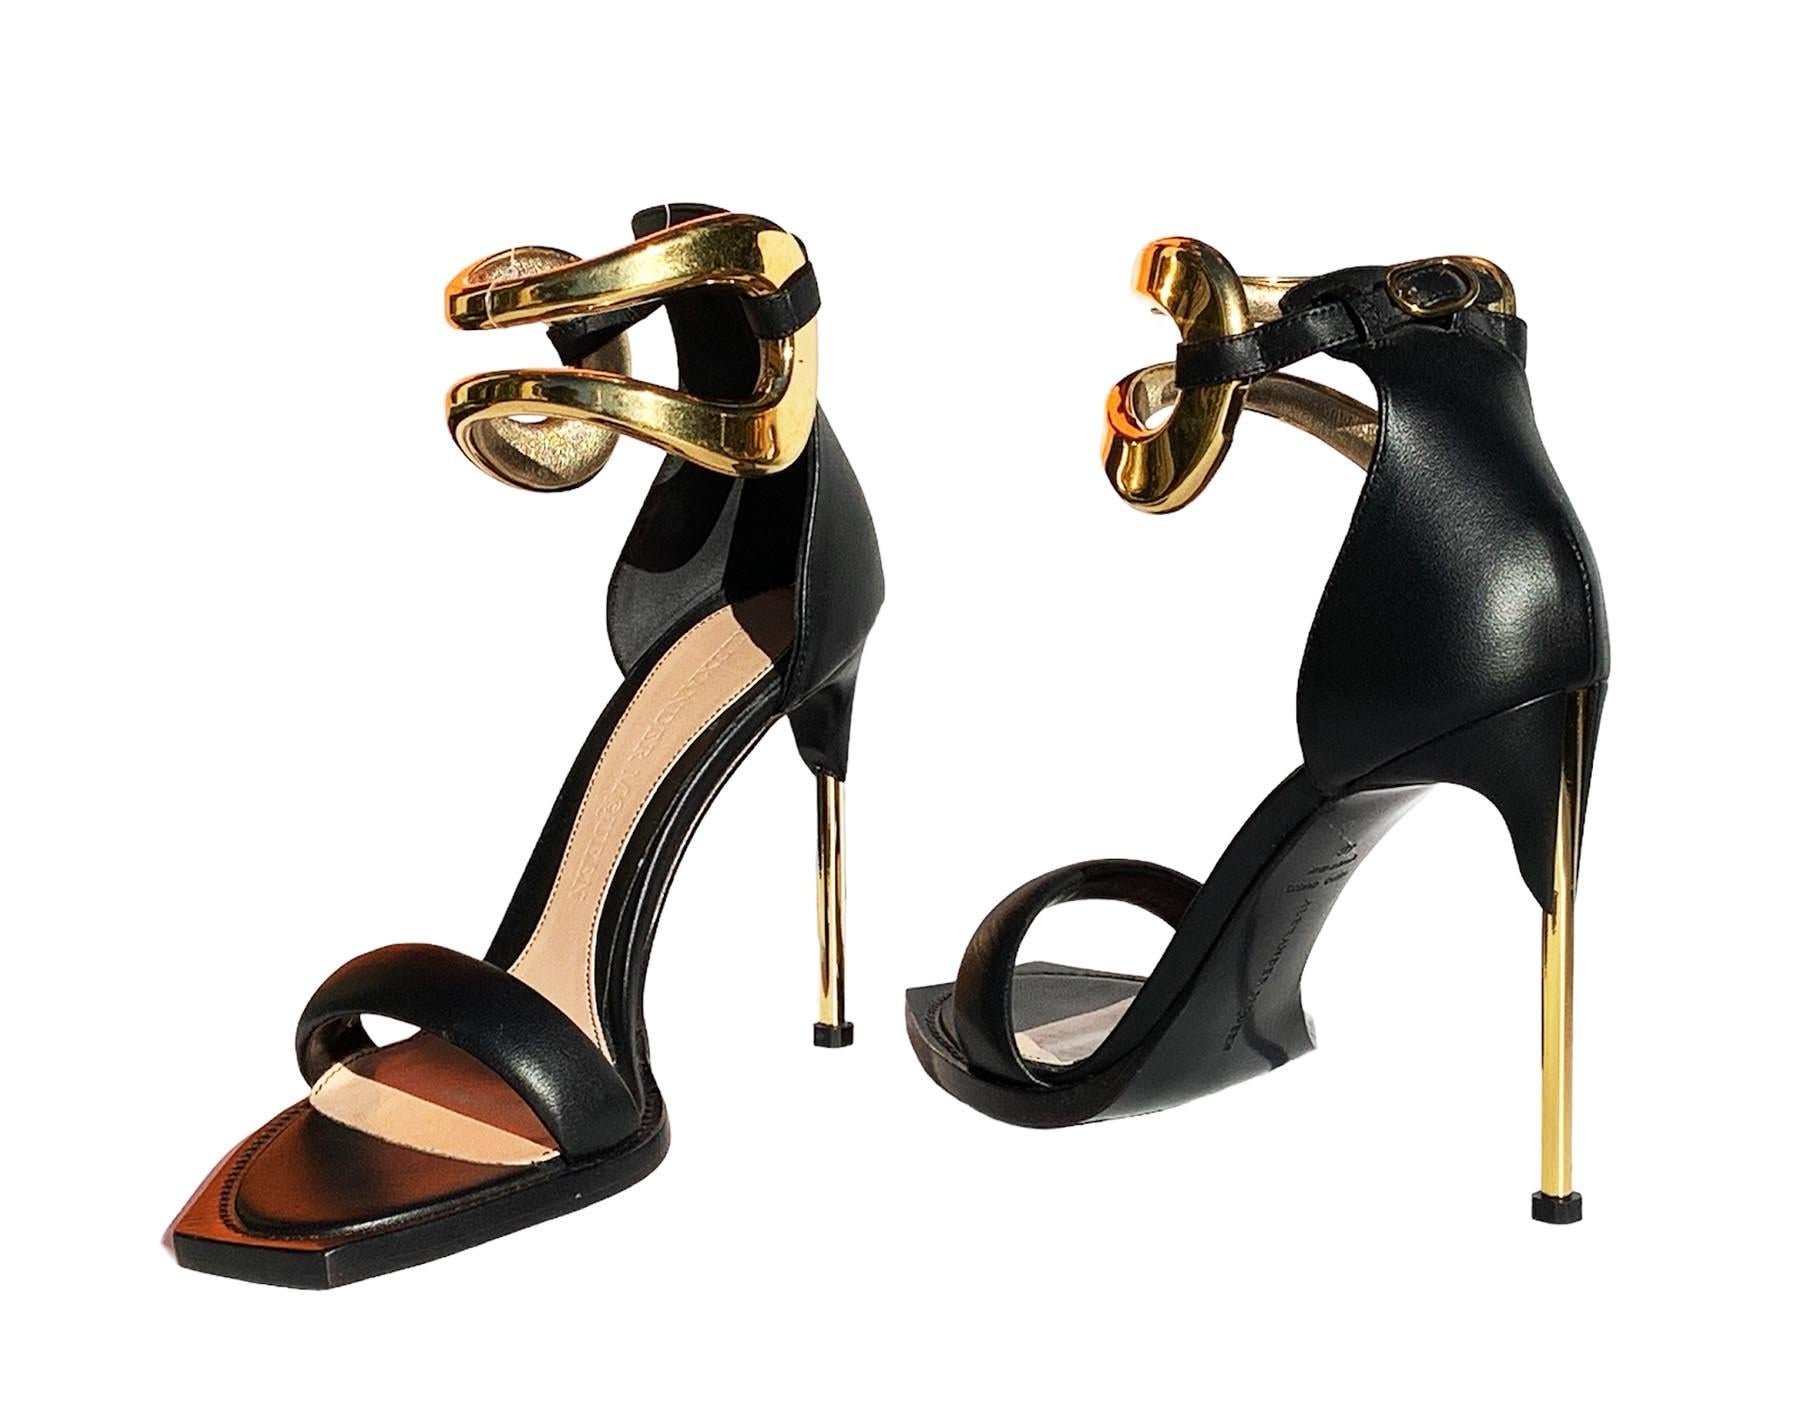 New Alexander McQueen Black Leather Ankle Wrap Sandals
Italian size - 40
Black Leather, Gold Tone Metal Ankle Strap with Buckle Closure, 
Square Toe, Gold Tone Metal Stiletto High Heel - 4.5 inches.
Leather Insole and Rubber/Leather Sole.
Made in